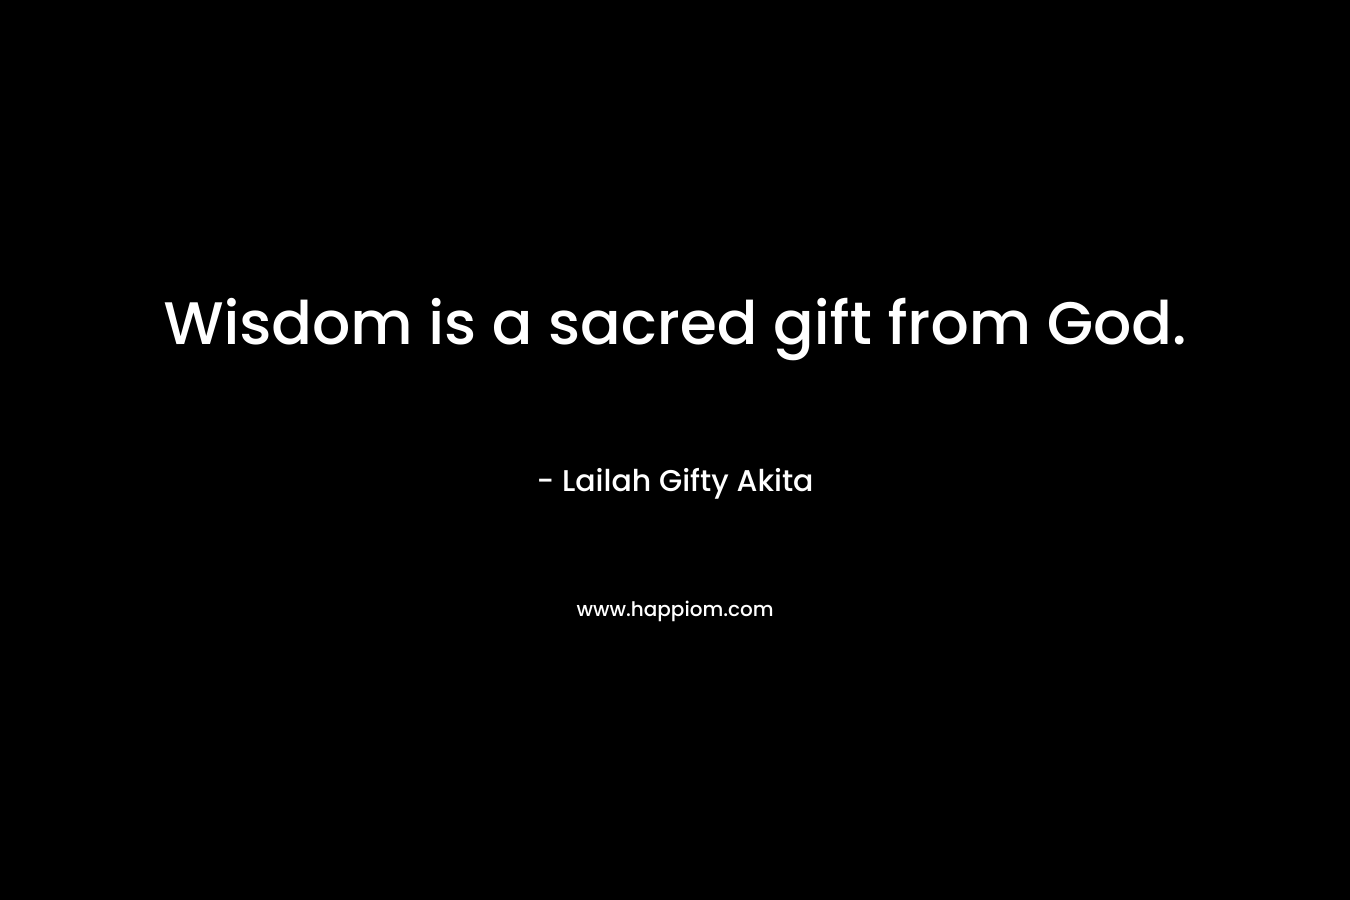 Wisdom is a sacred gift from God.